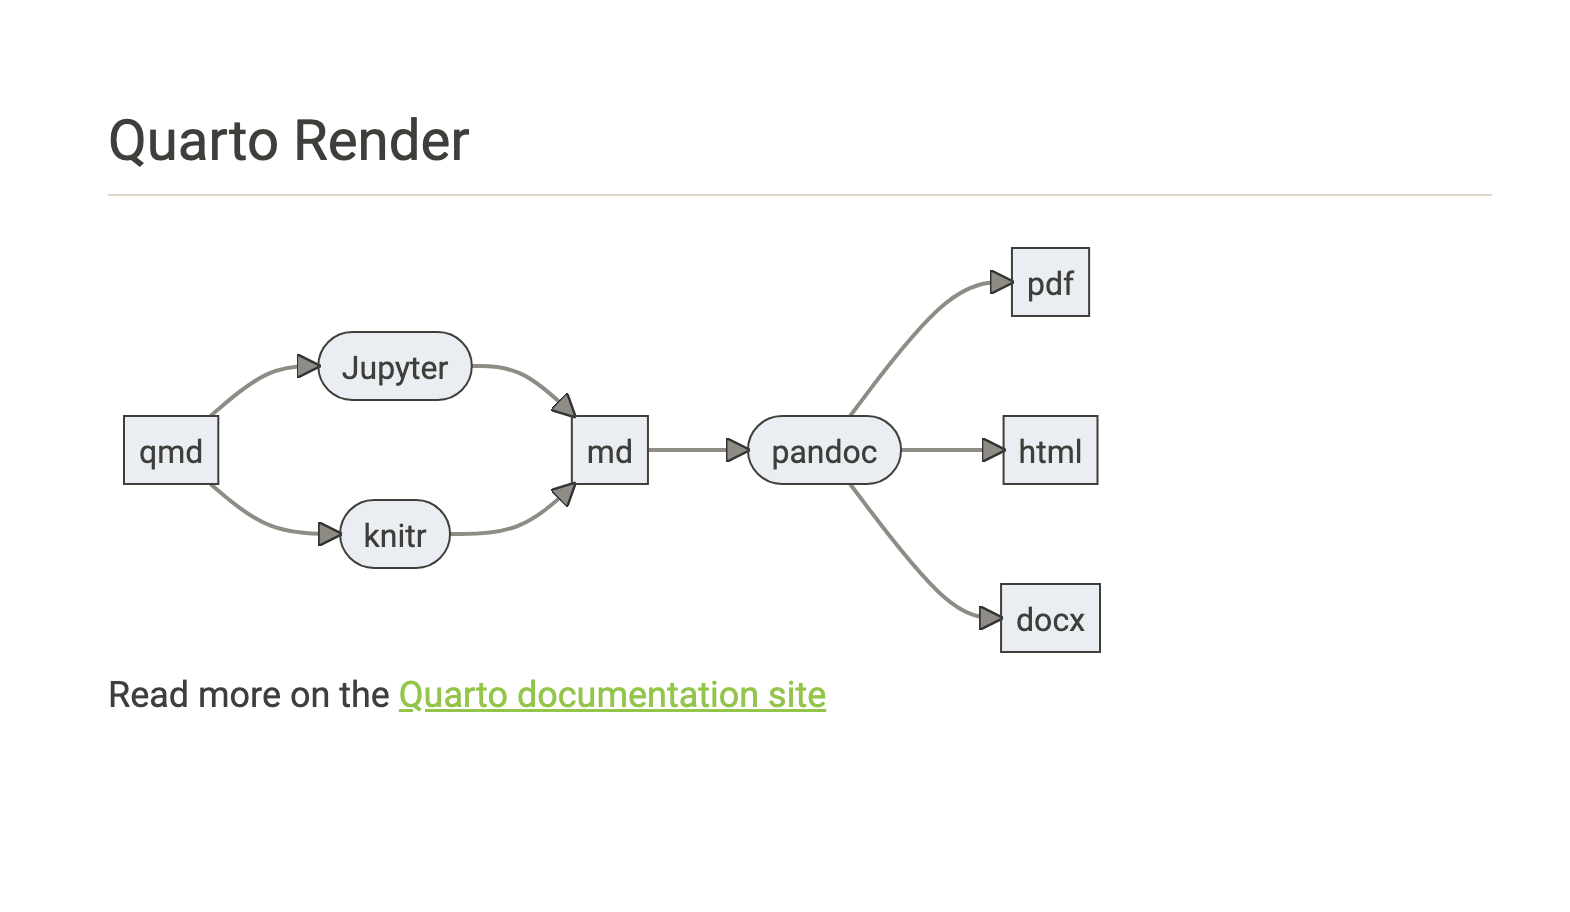 A screenshot of a Mermaid flowchart in a document using bootswatch's Sandstone theme.